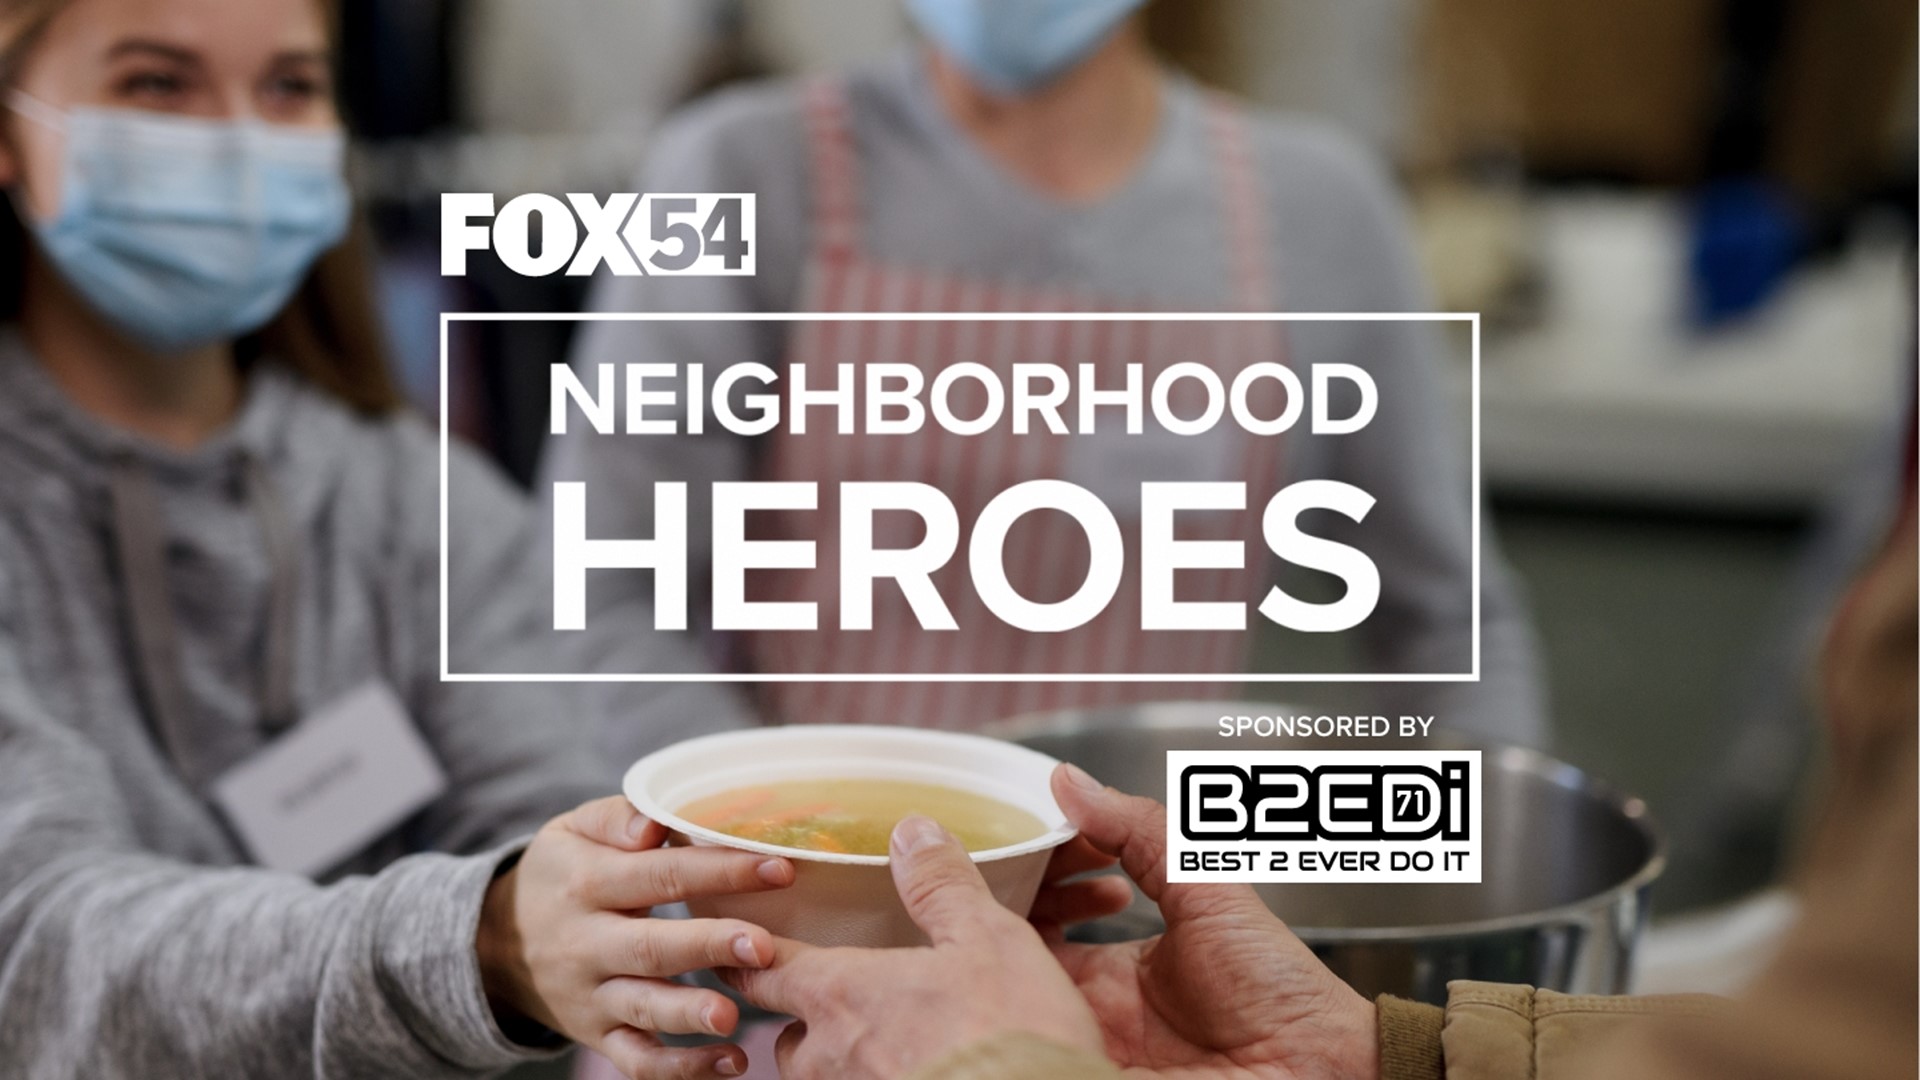 Do you know someone who goes above and beyond for their community? Nominate them to be recognized as a Neighborhood Hero.